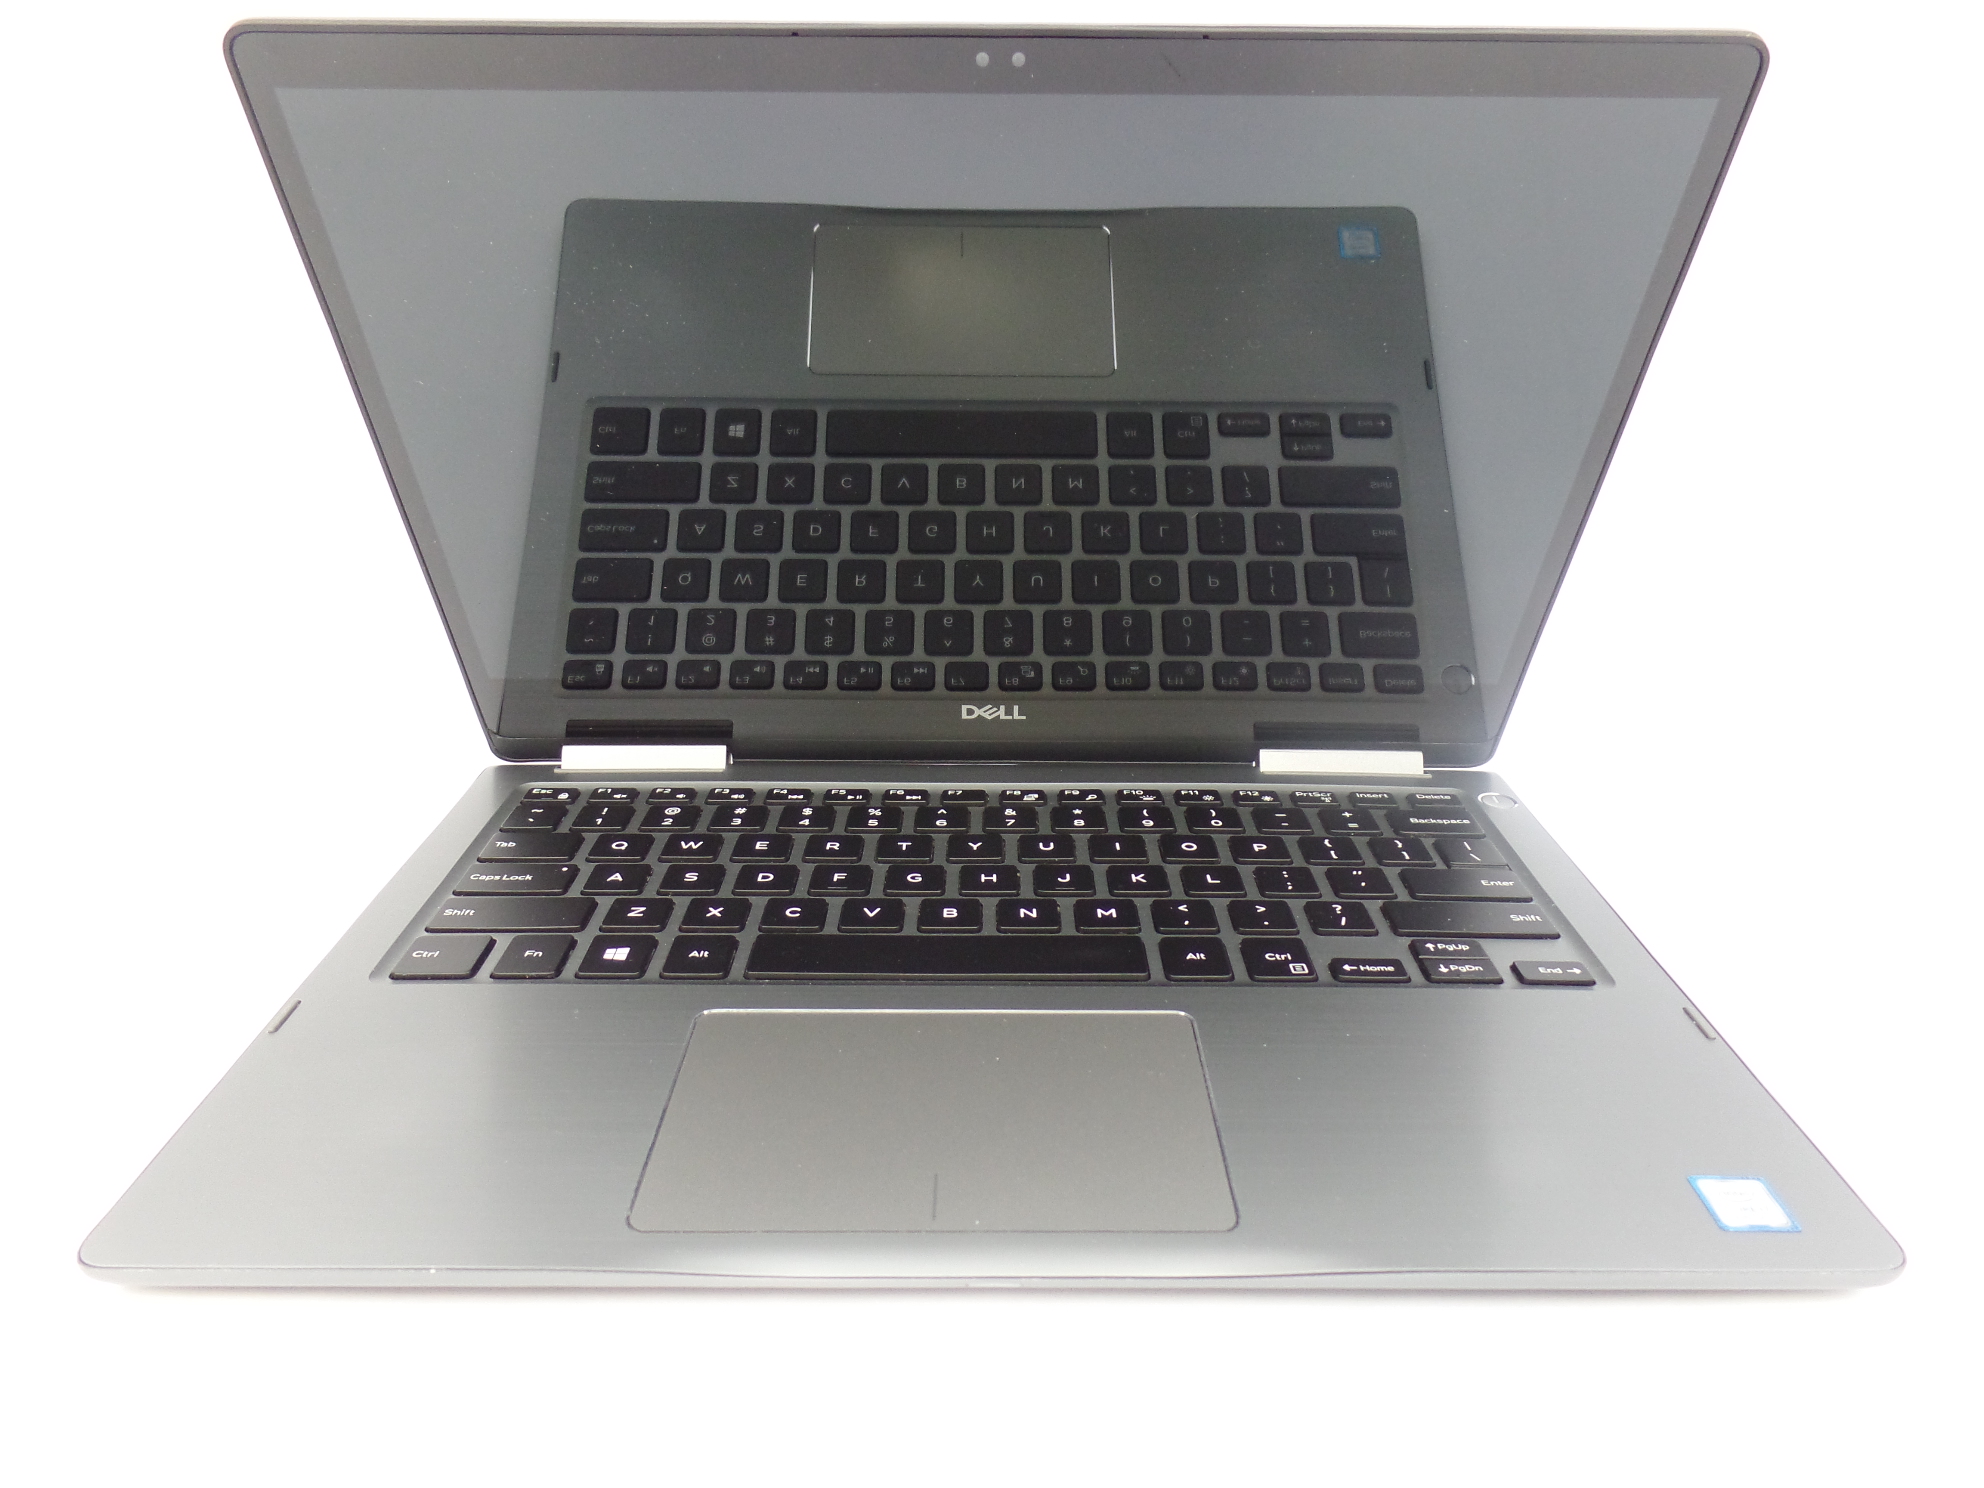 Used (good working condition) Dell Inspiron 7373 13.3" FHD Touch i7-8550U 16GB 256GB SSD W10P 2in1 Laptop U - image 2 of 6